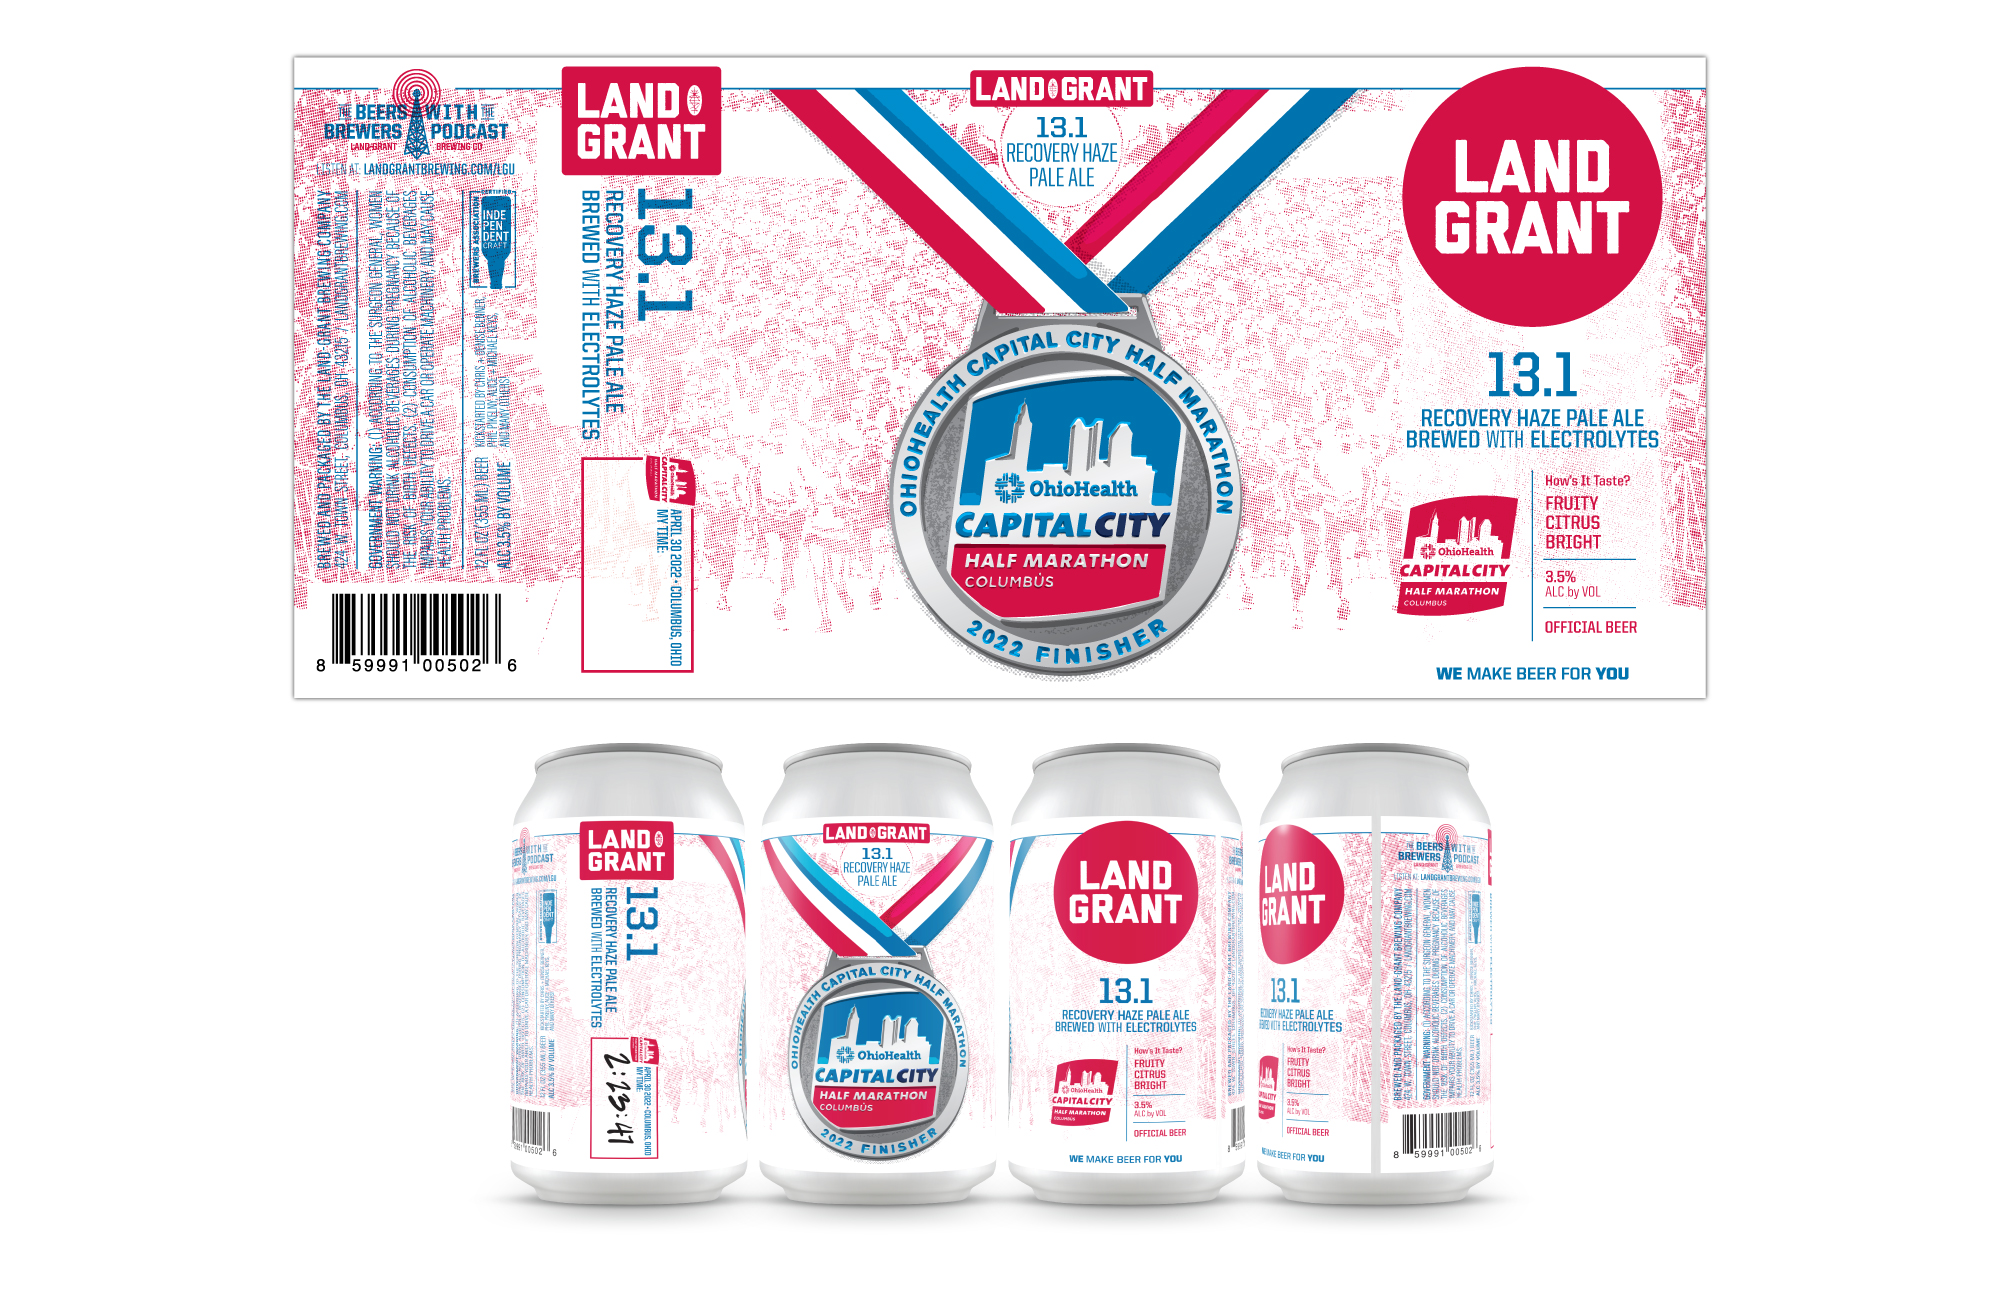 Land-Grant Produces Custom Limited-Edition Beer To Continue Ground-Breaking Sponsorship of OhioHealth Capital City Half Marathon